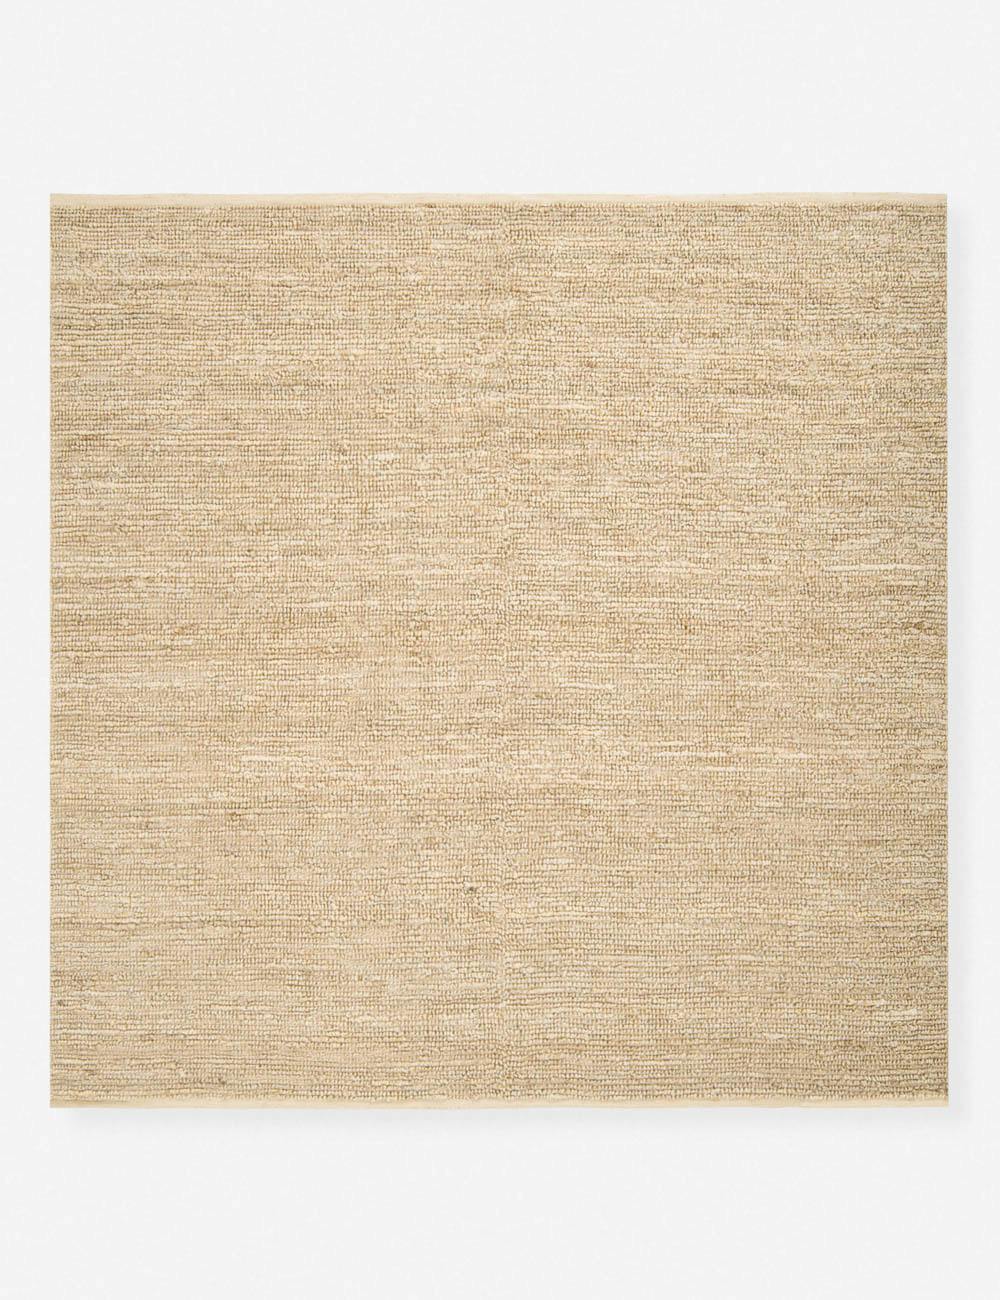 Handwoven Earthy Tone Solid Jute 8' Square Area Rug